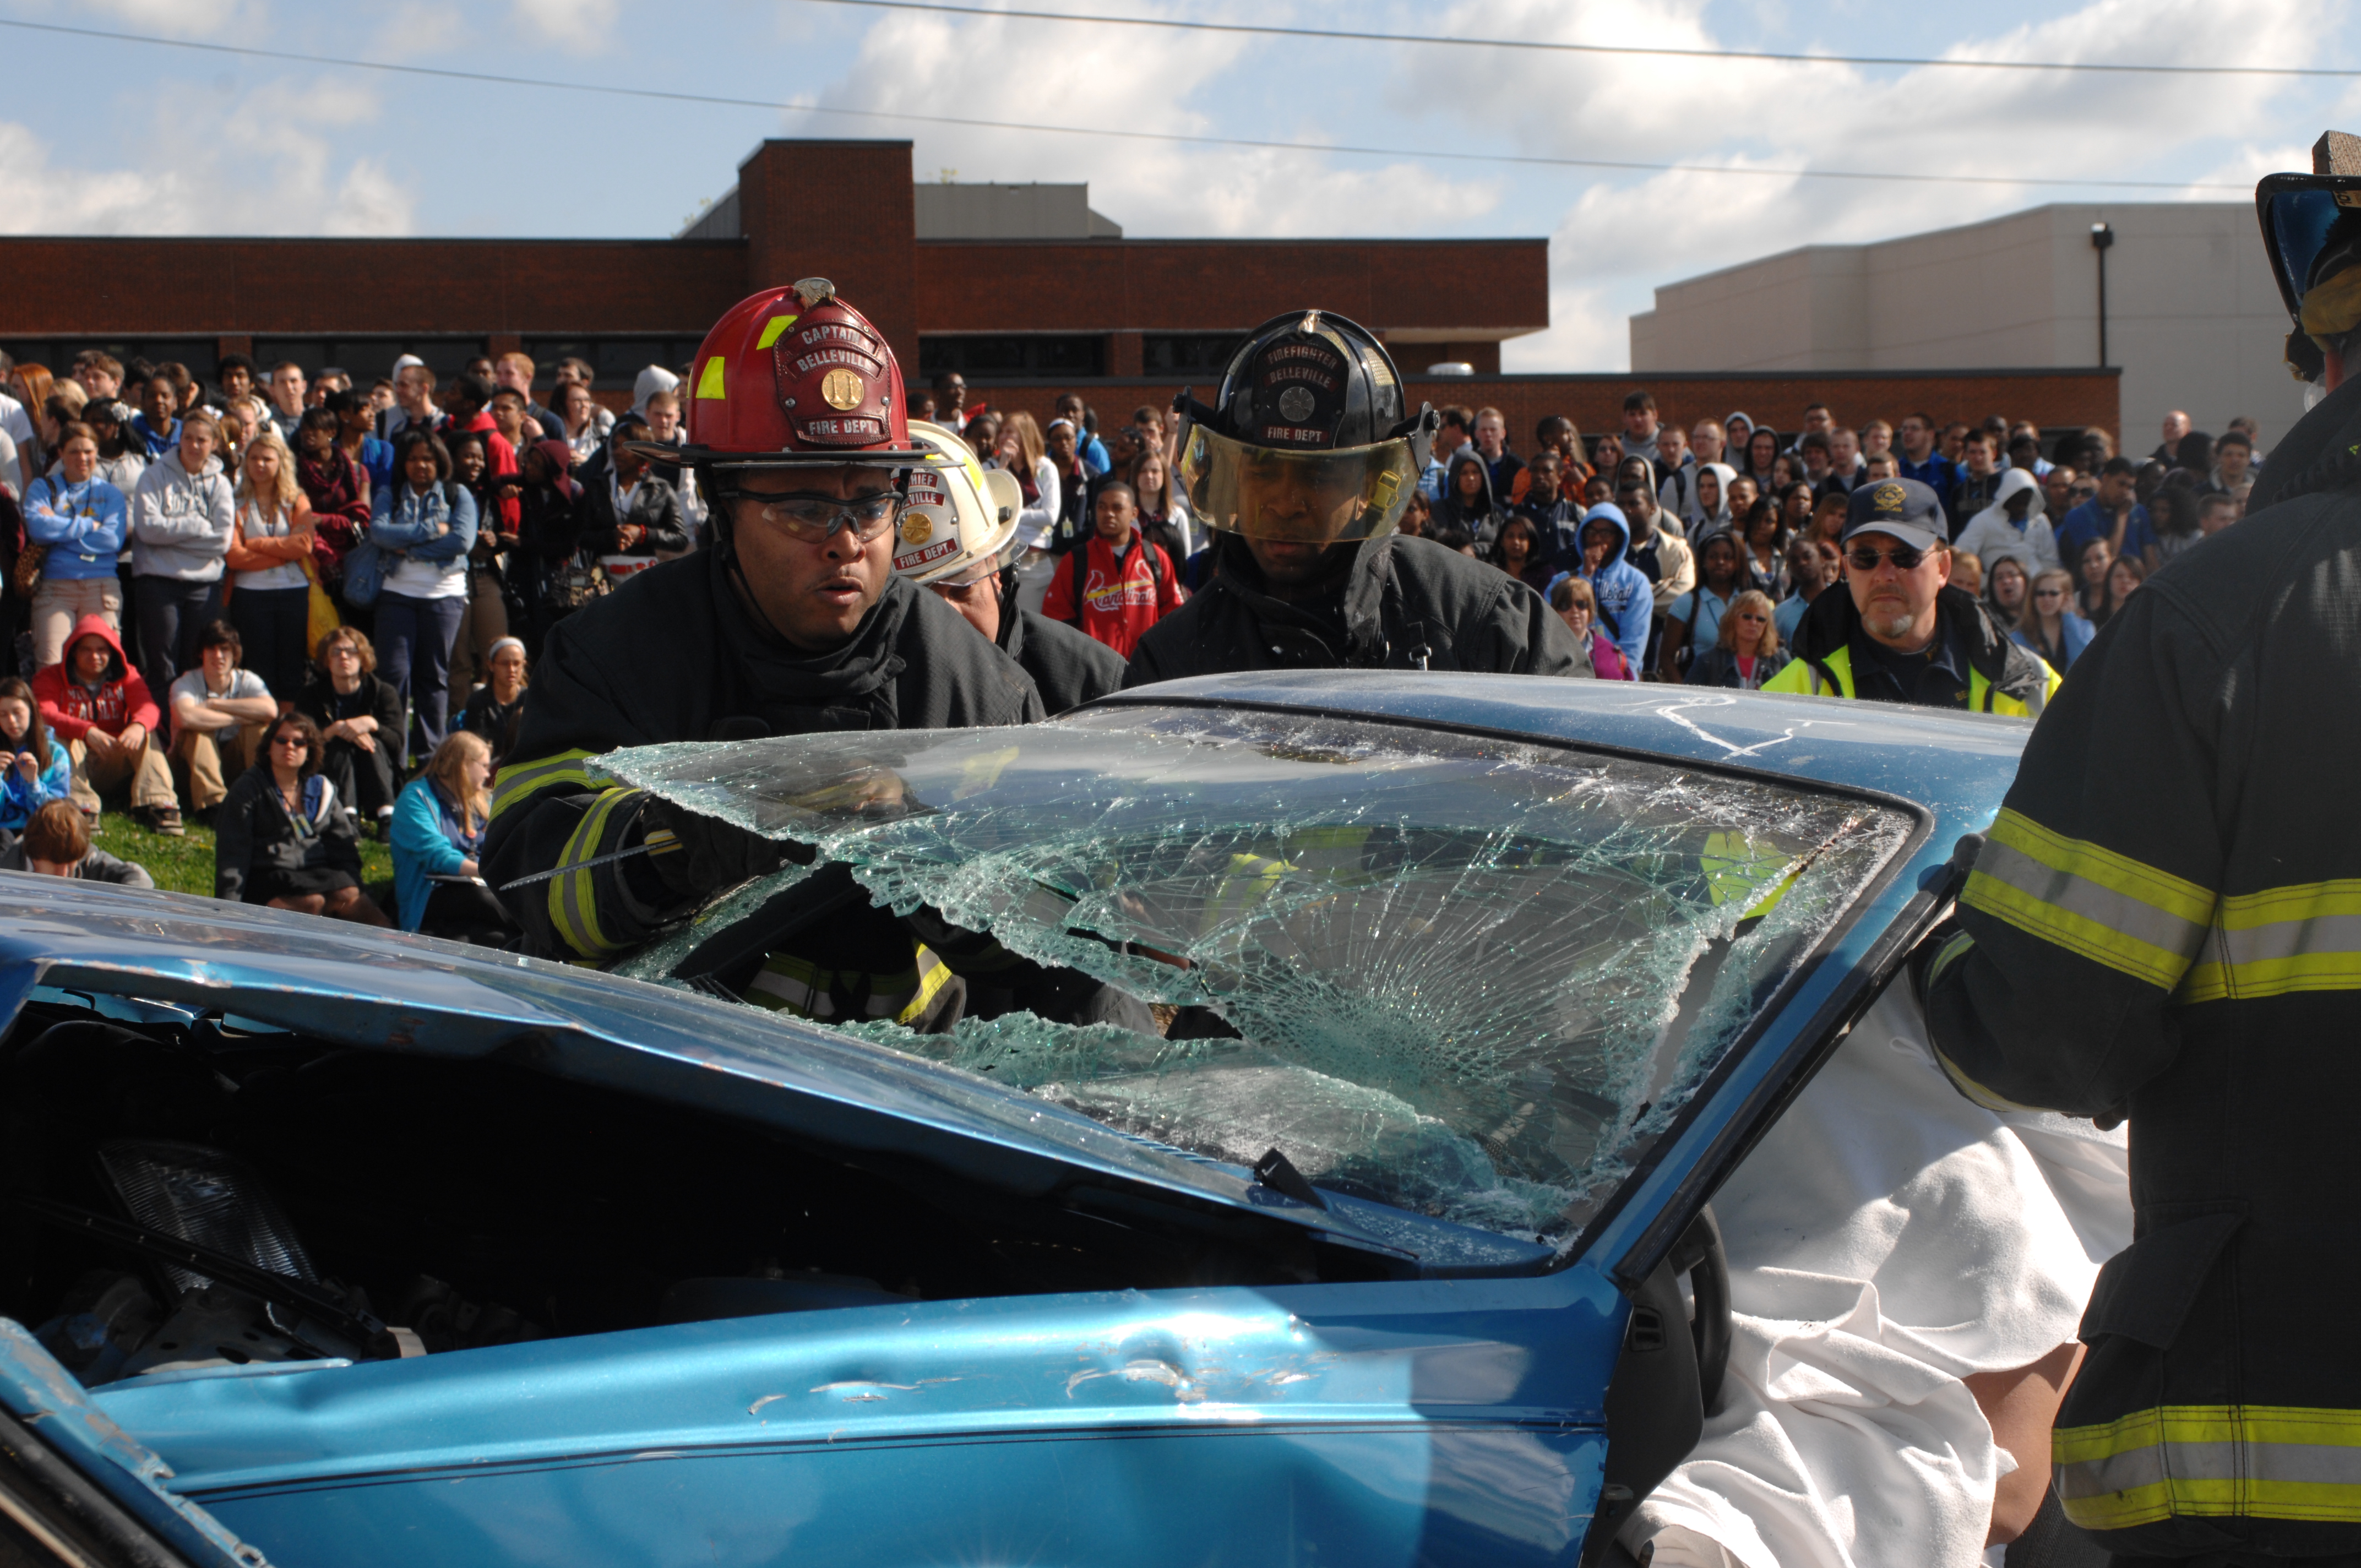 A simulation of the risky behavior of drinking and driving.^[[Image](https://www.scott.af.mil/News/Features/Display/Article/162484/medical-group-moulage-experts-help-teens-understand-dangers-of-drinking-and-dri/) by the [Scott Air Force Base](https://www.scott.af.mil/) is in the public domain]